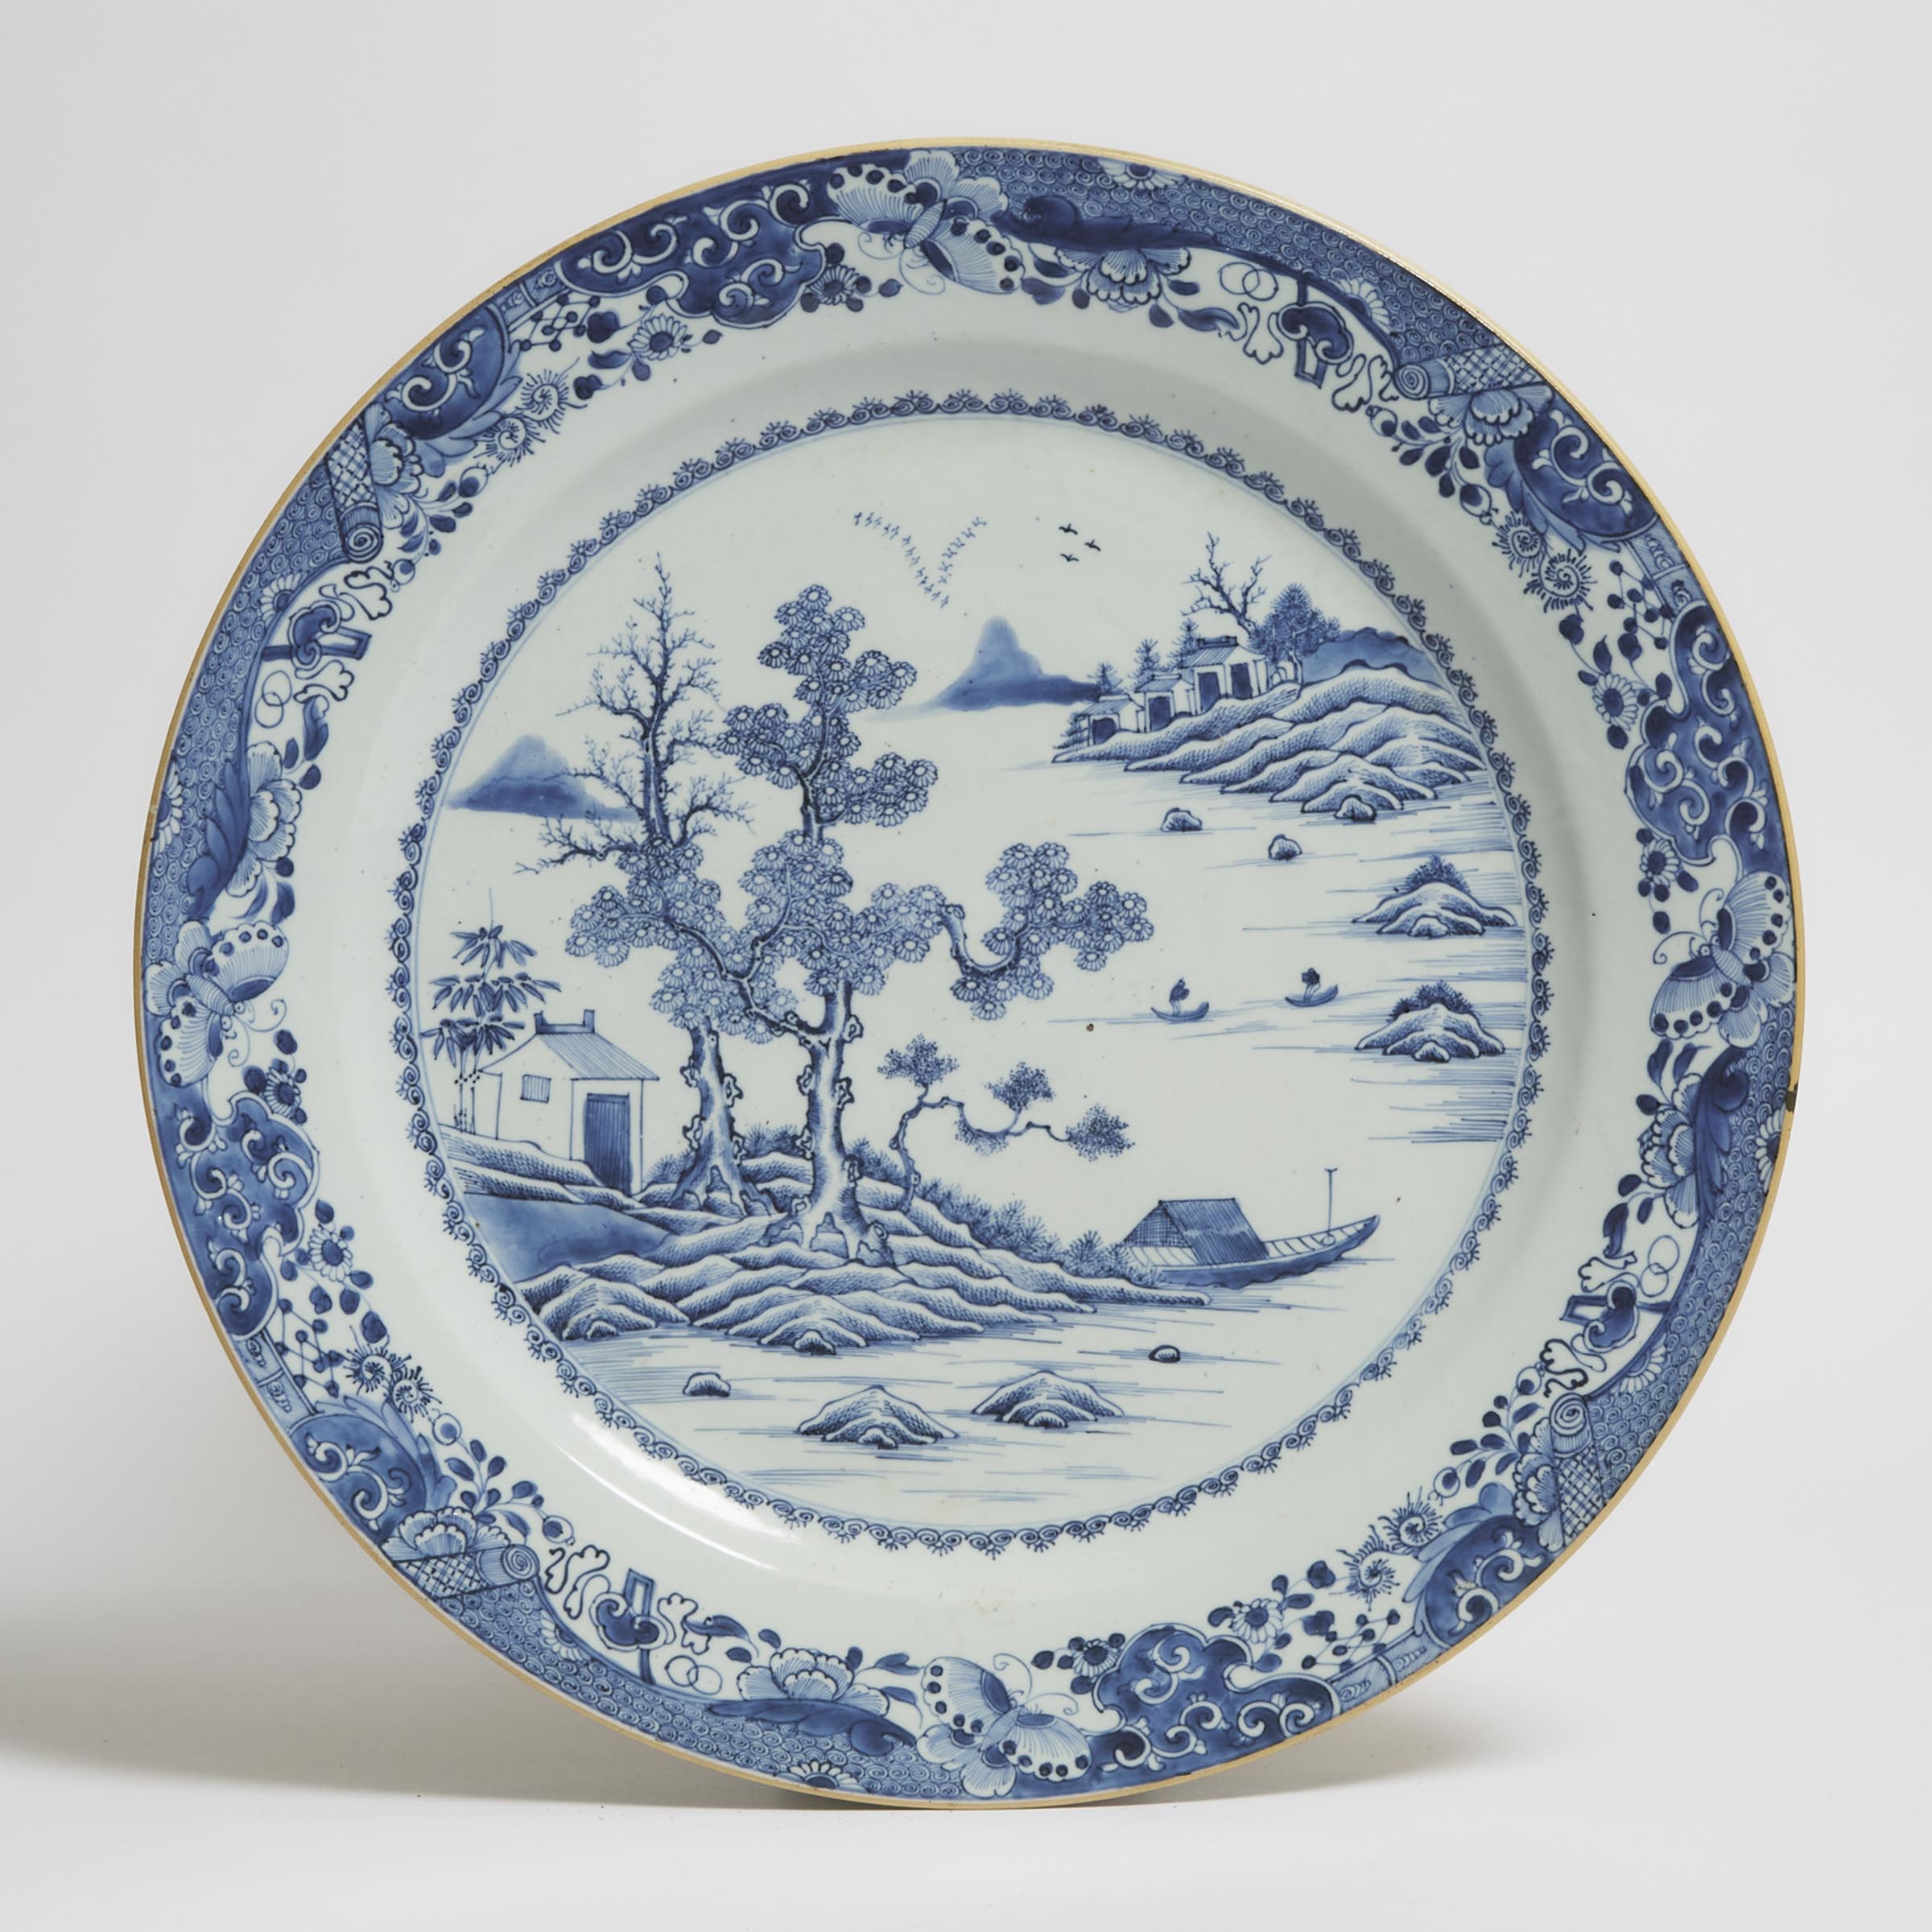 A Large Blue and White 'Landscape' Plate, 18th Century